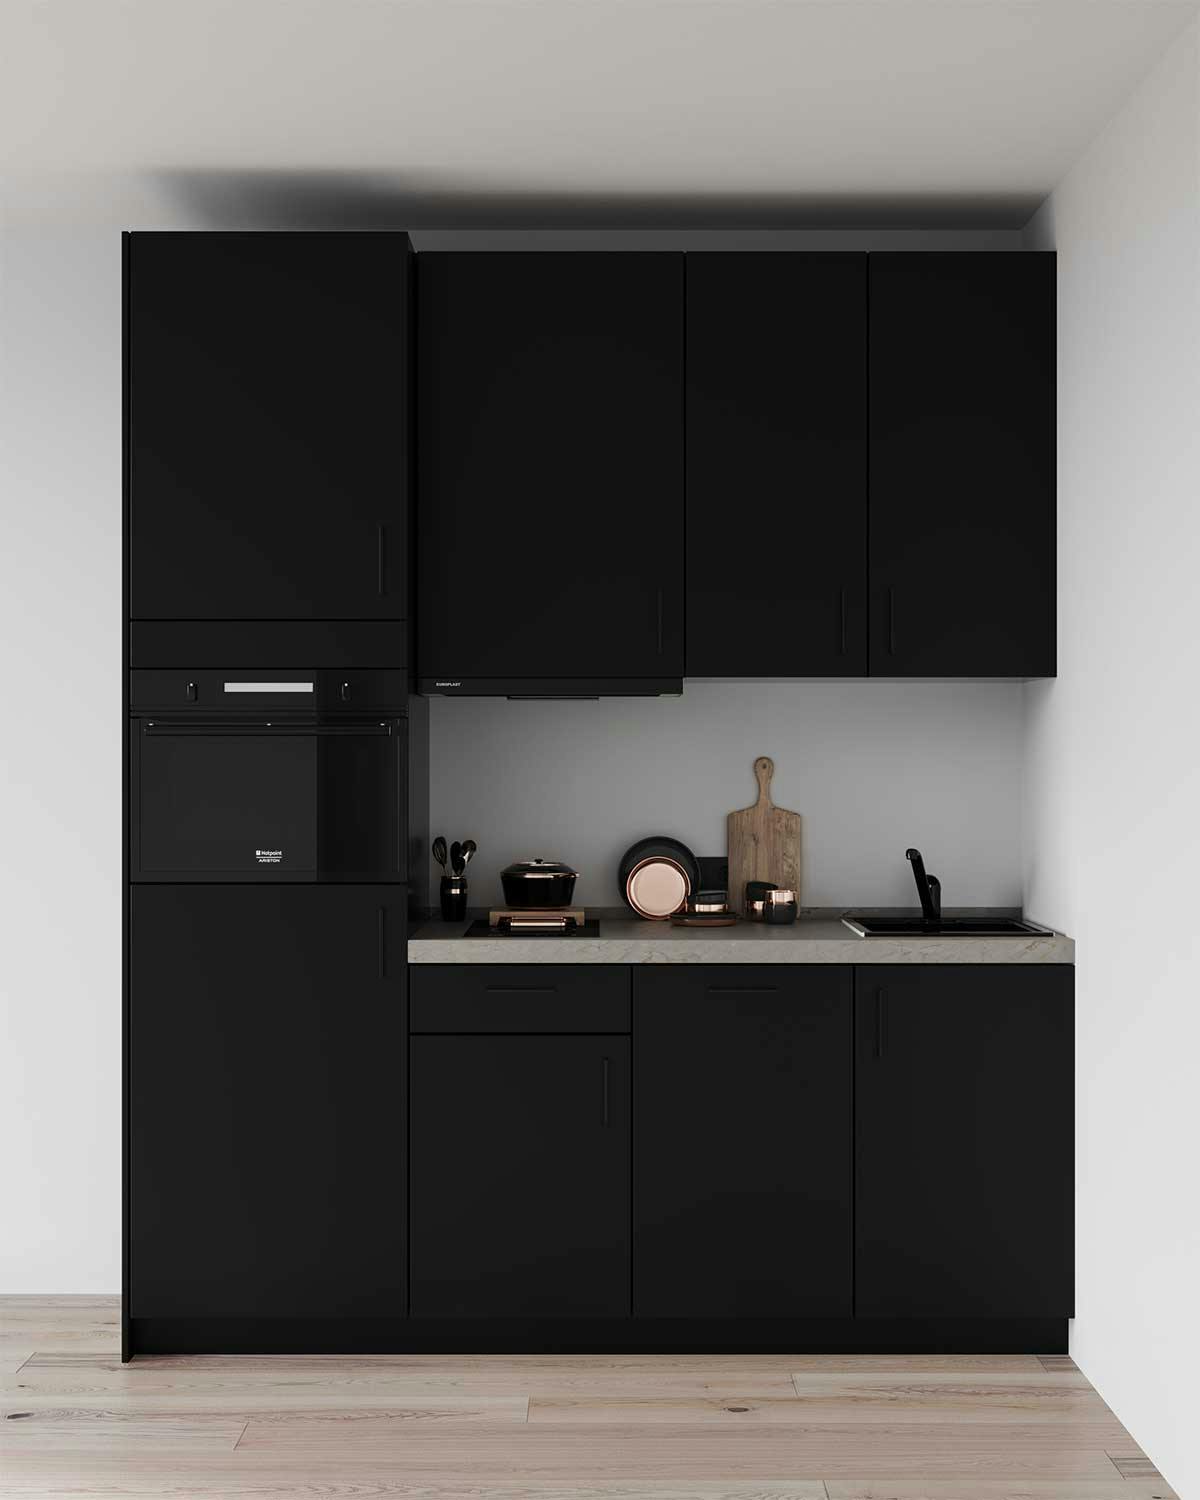 3D Furniture Visualization of the black Kitchen in apartment in Düsseldorf, Germany.